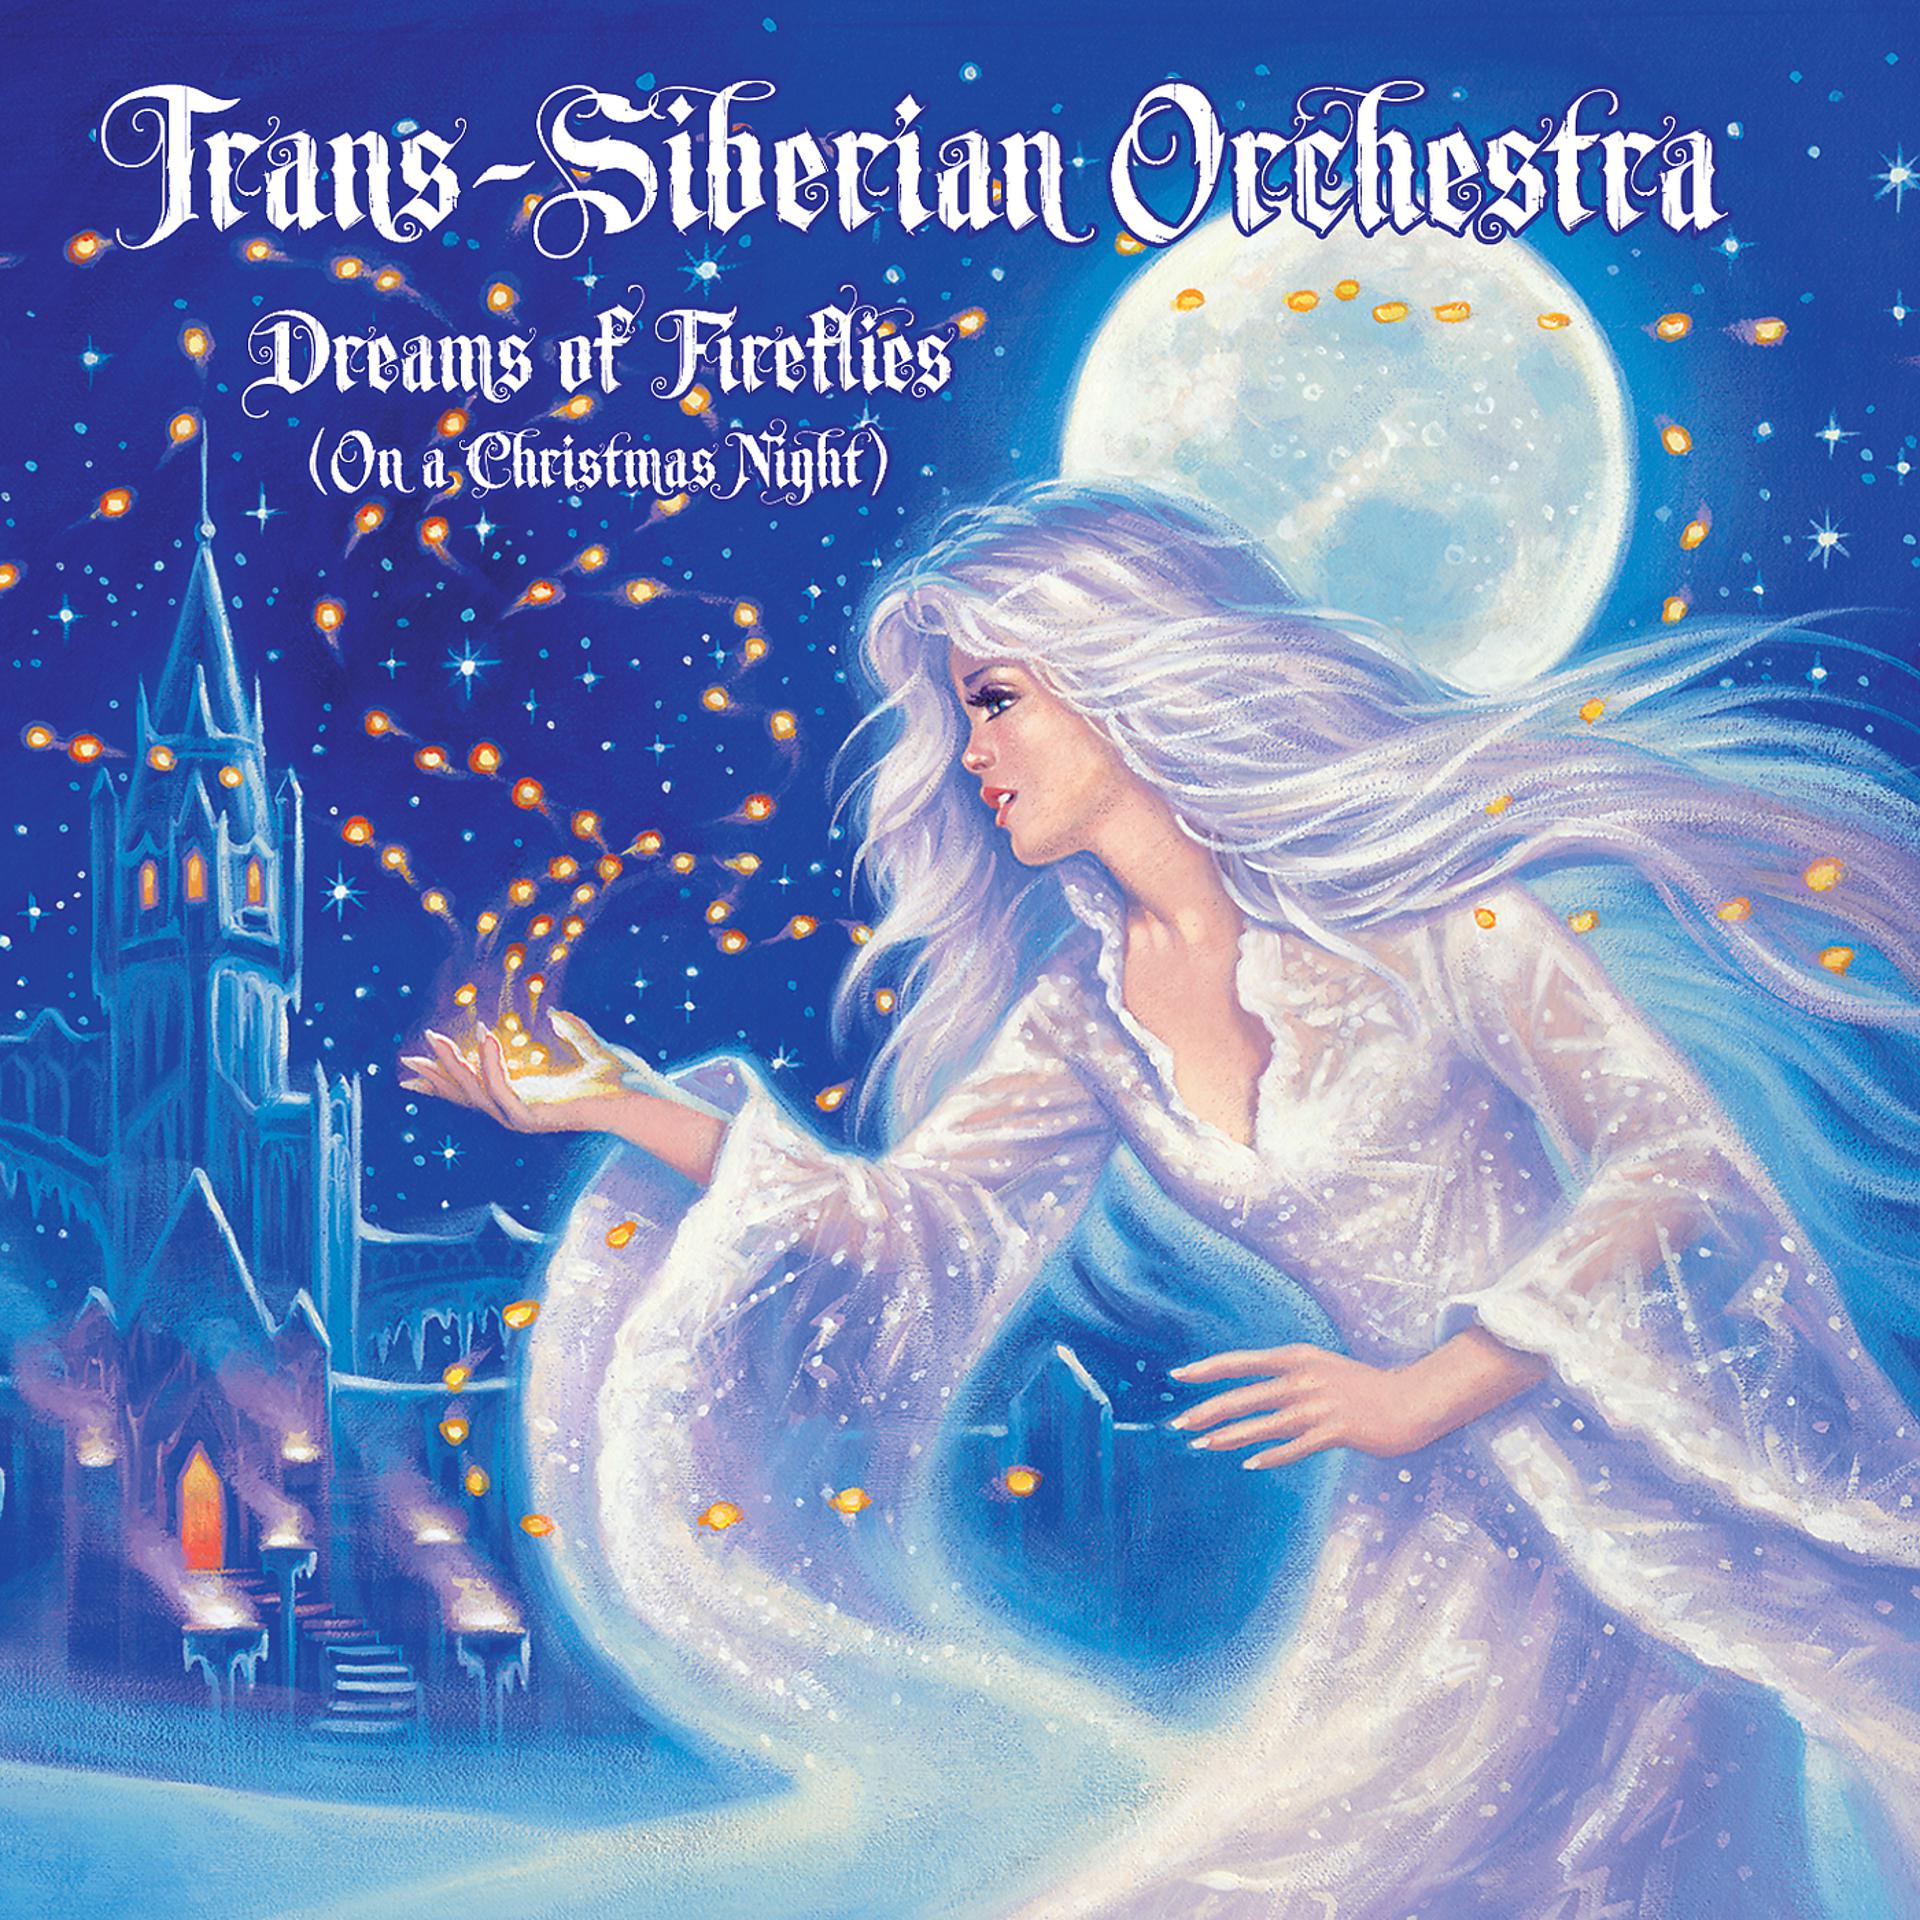 Siberian orchestra. Dreams of Fireflies Trans-Siberian Orchestra. Группа Trans-Siberian Orchestra. Trans Siberian Orchestra Winter. Trans Siberian Orchestra CD.